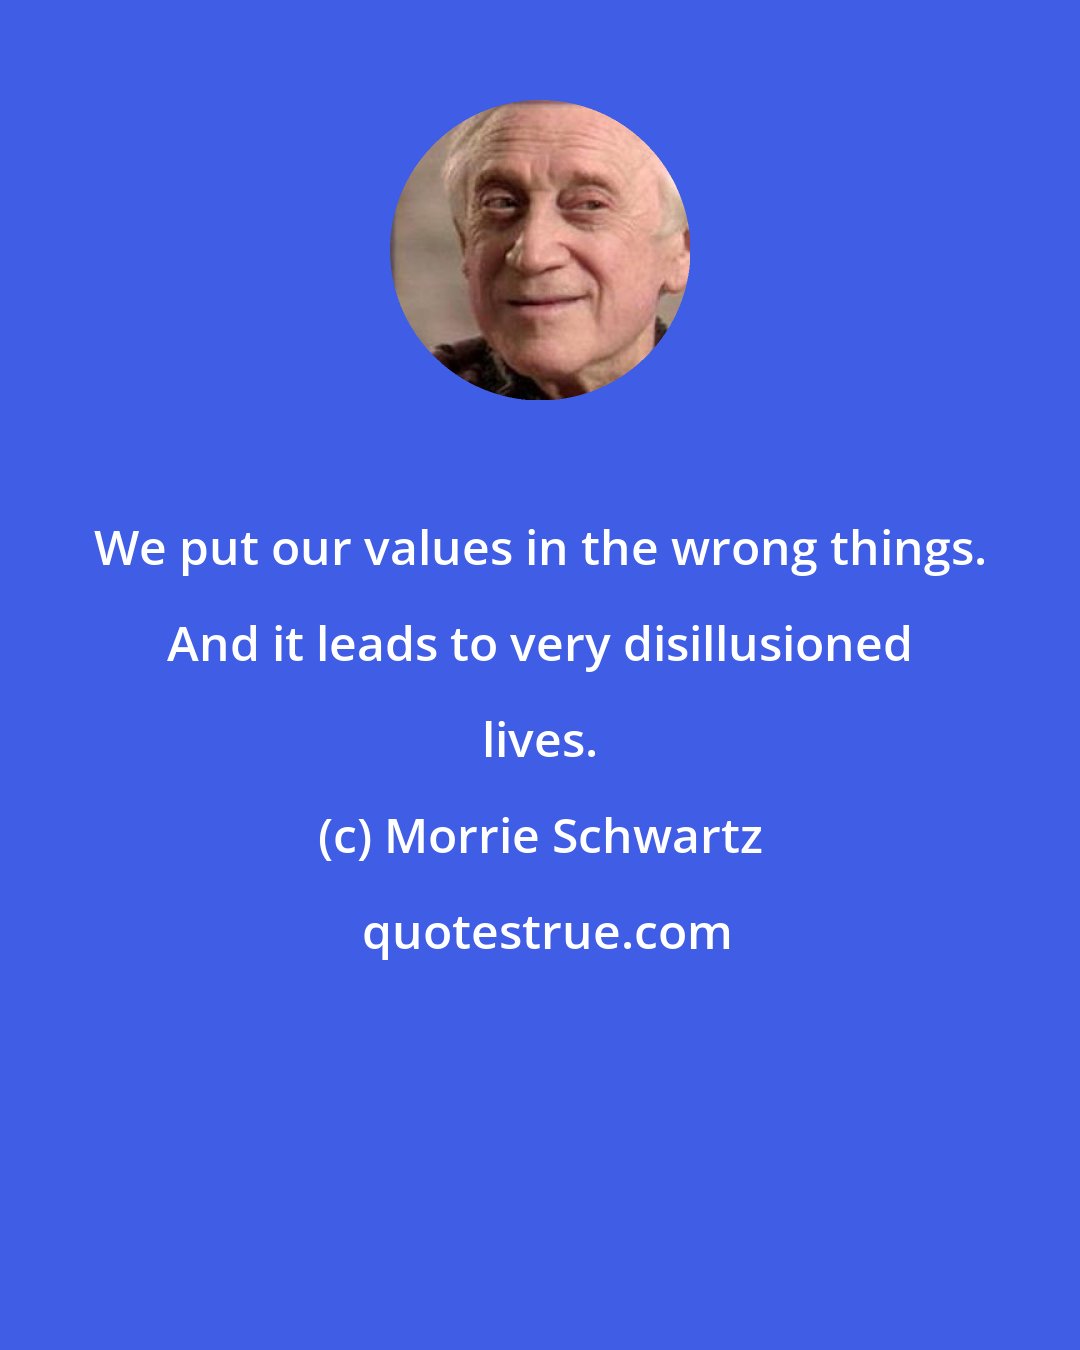 Morrie Schwartz: We put our values in the wrong things. And it leads to very disillusioned lives.